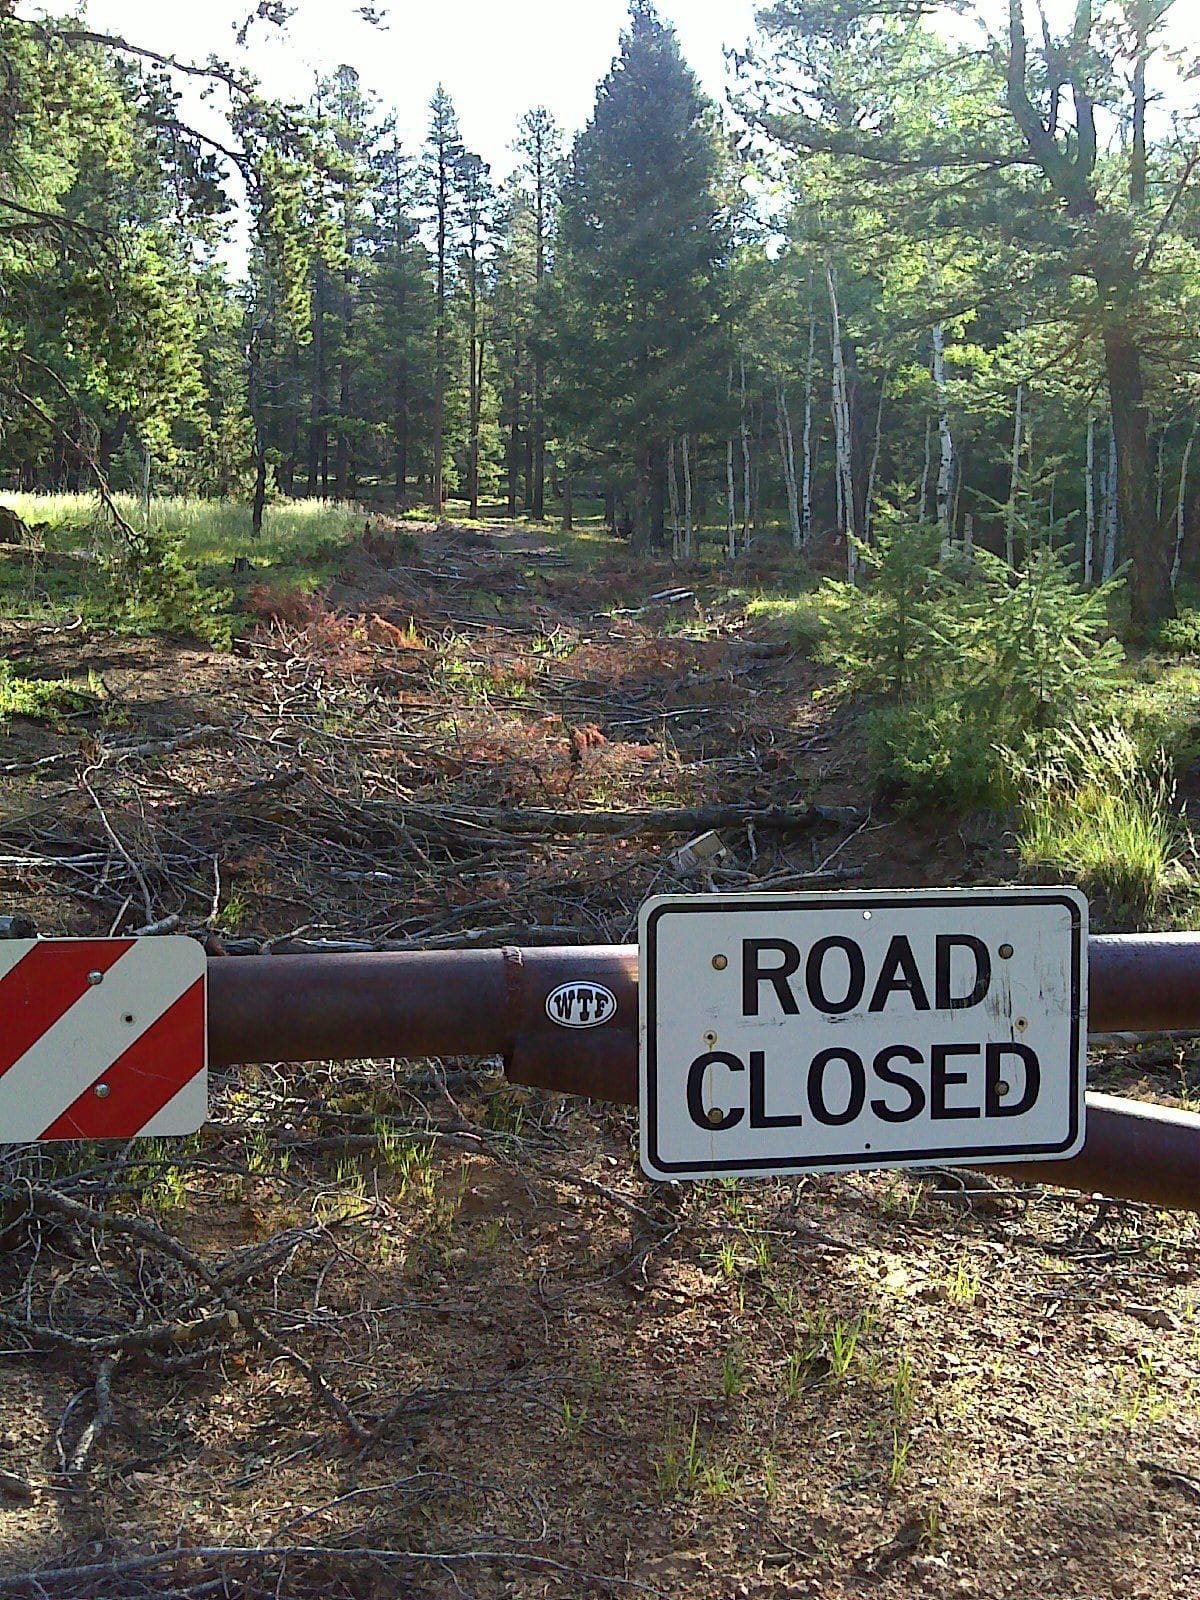 Road Closed sign on gate in front of old road and forest